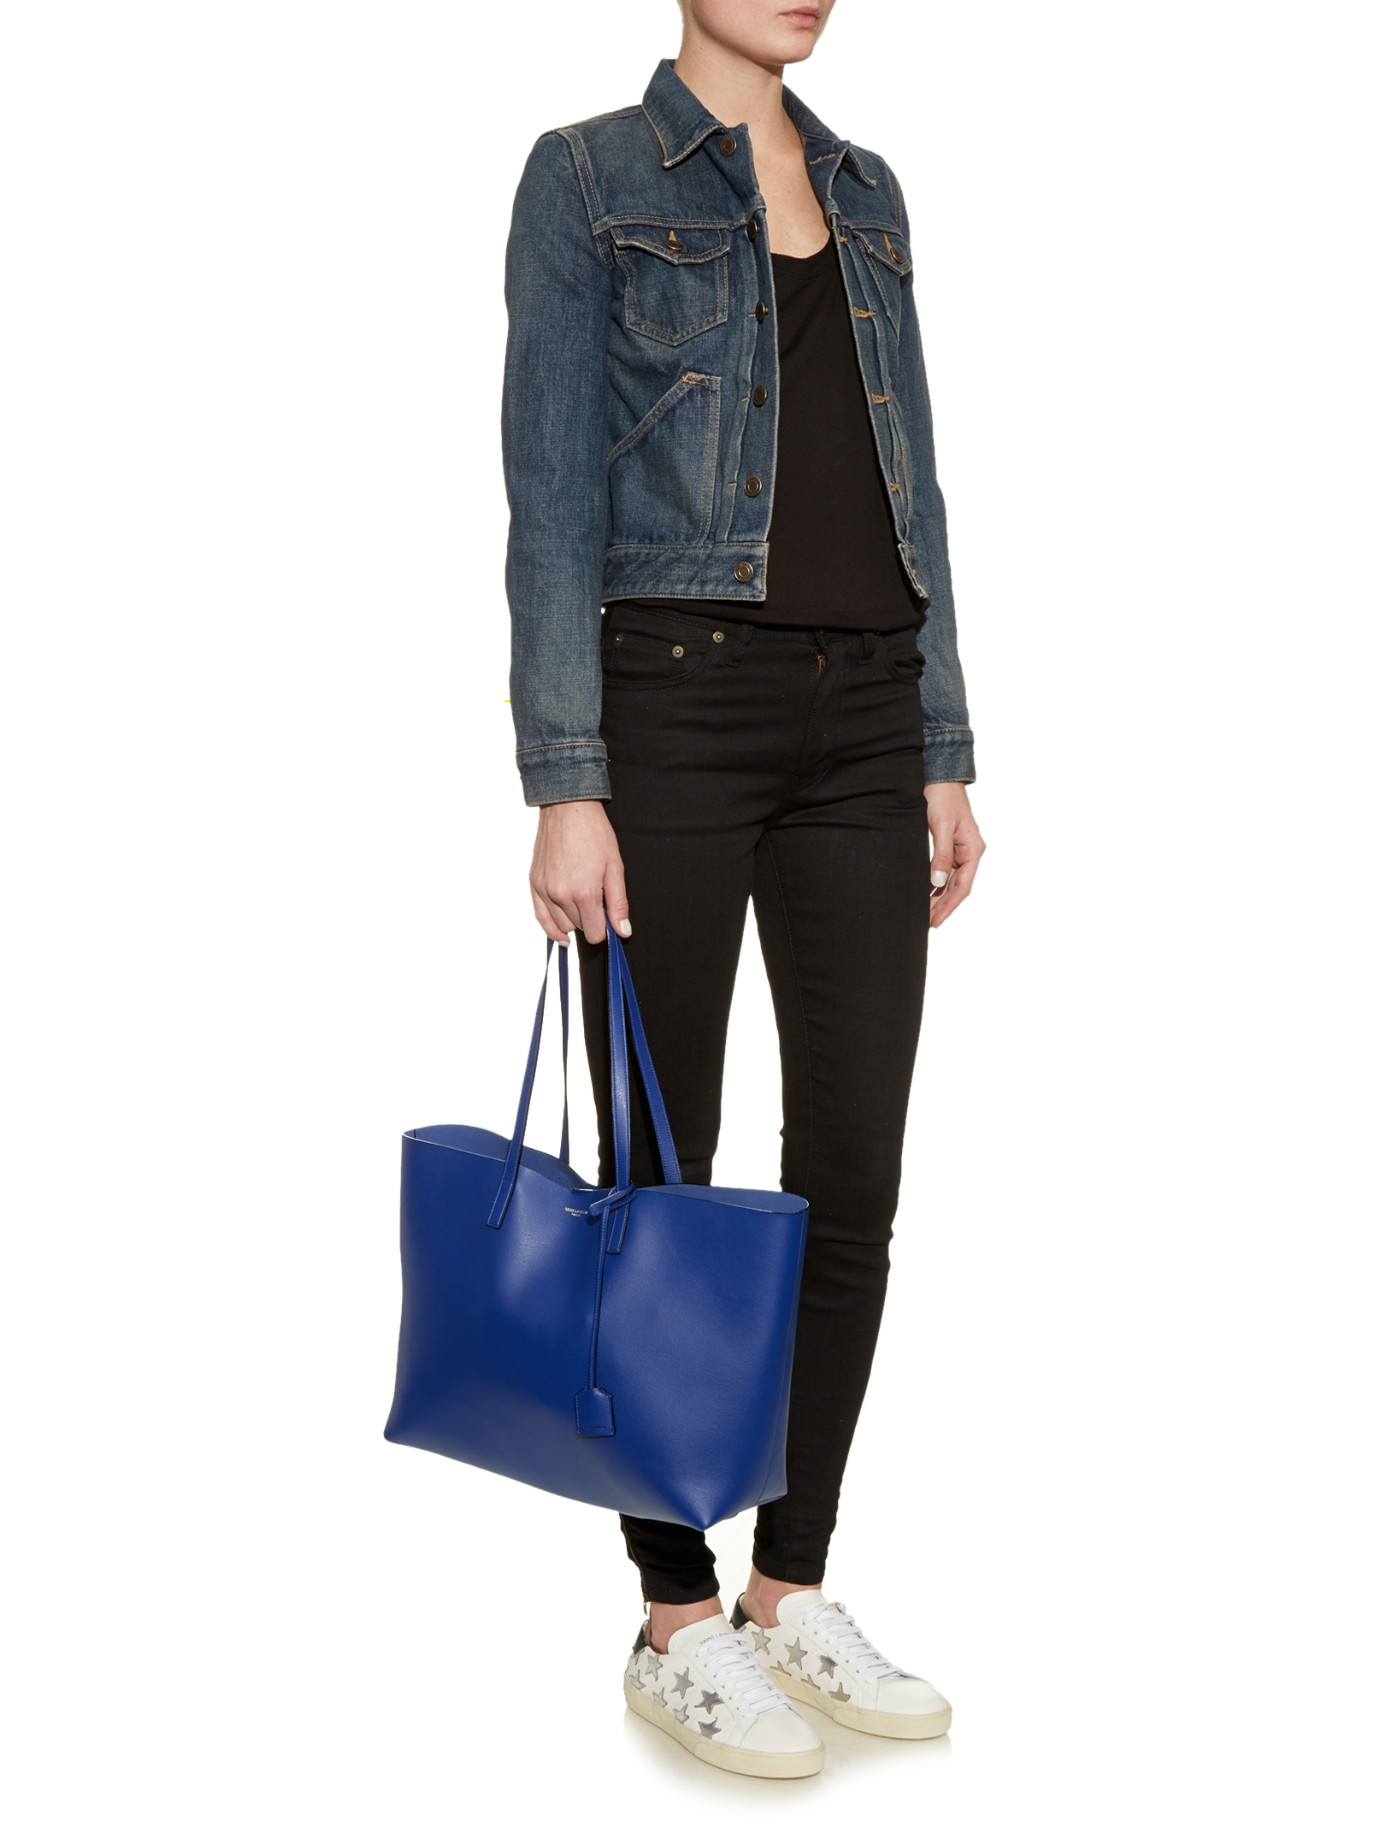 Saint Laurent Large Leather Shopping Bag in Blue